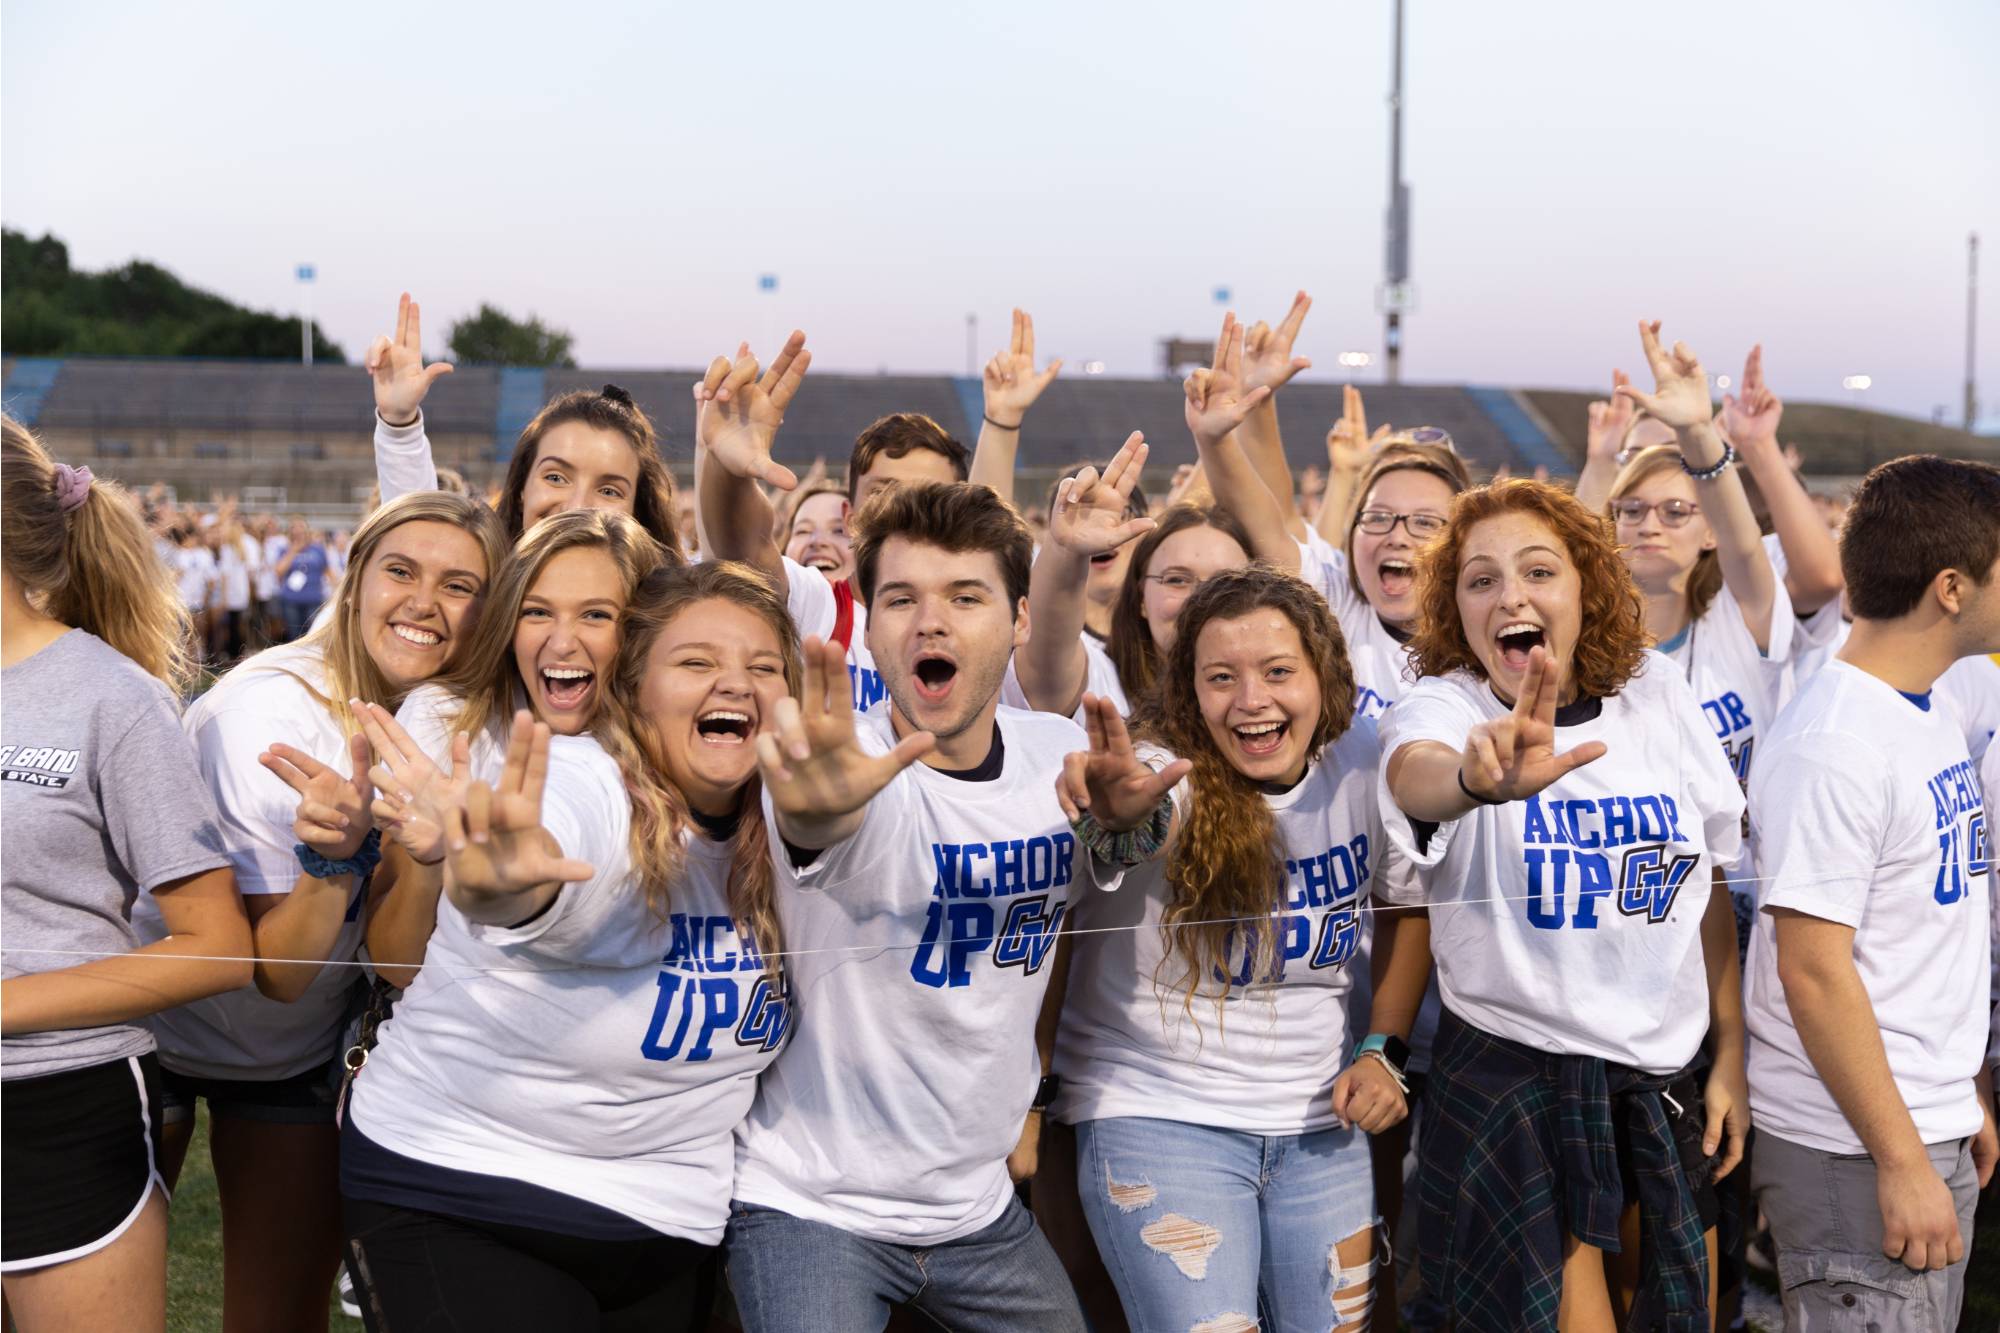 GVSU students attending a football game and showing "Laker Up" hand sign